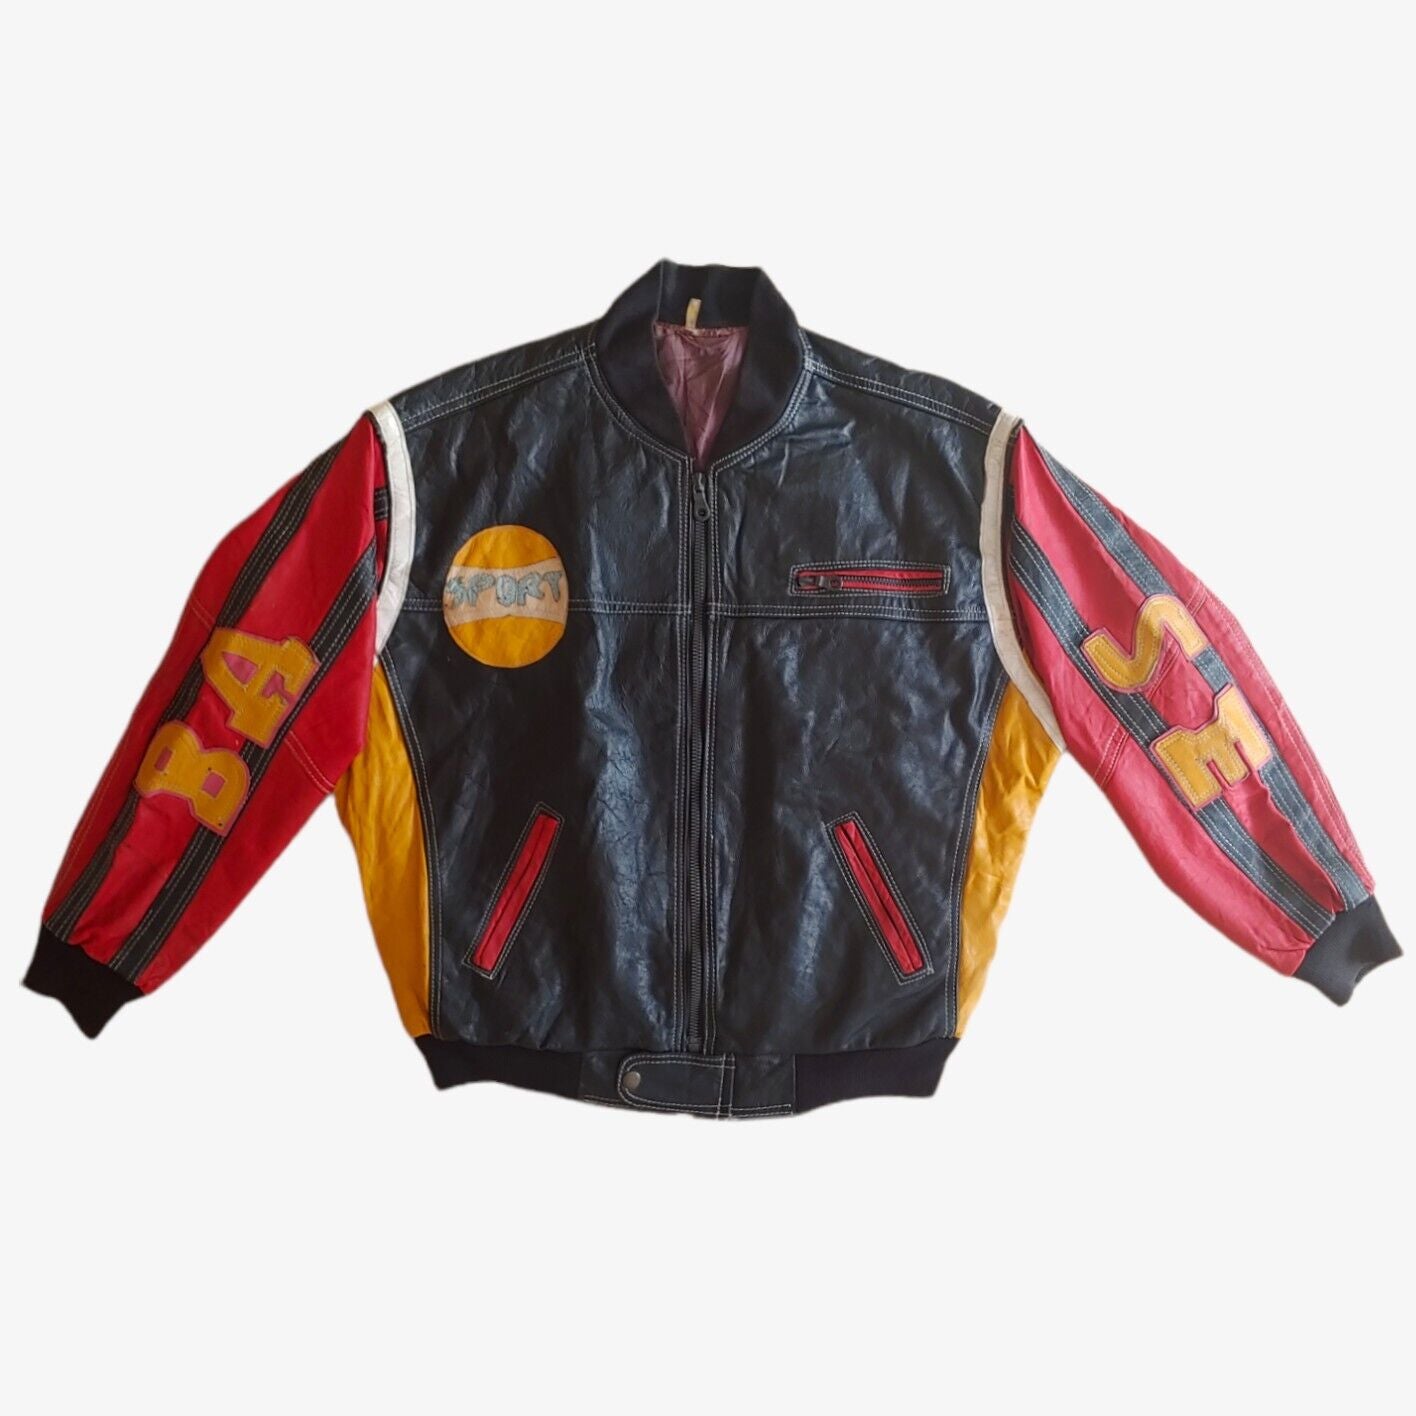 Vintage 90s Baseball Embroidered Spell Out Colourful Leather Varsity Jacket With Big Back Motif - Casspios Dream